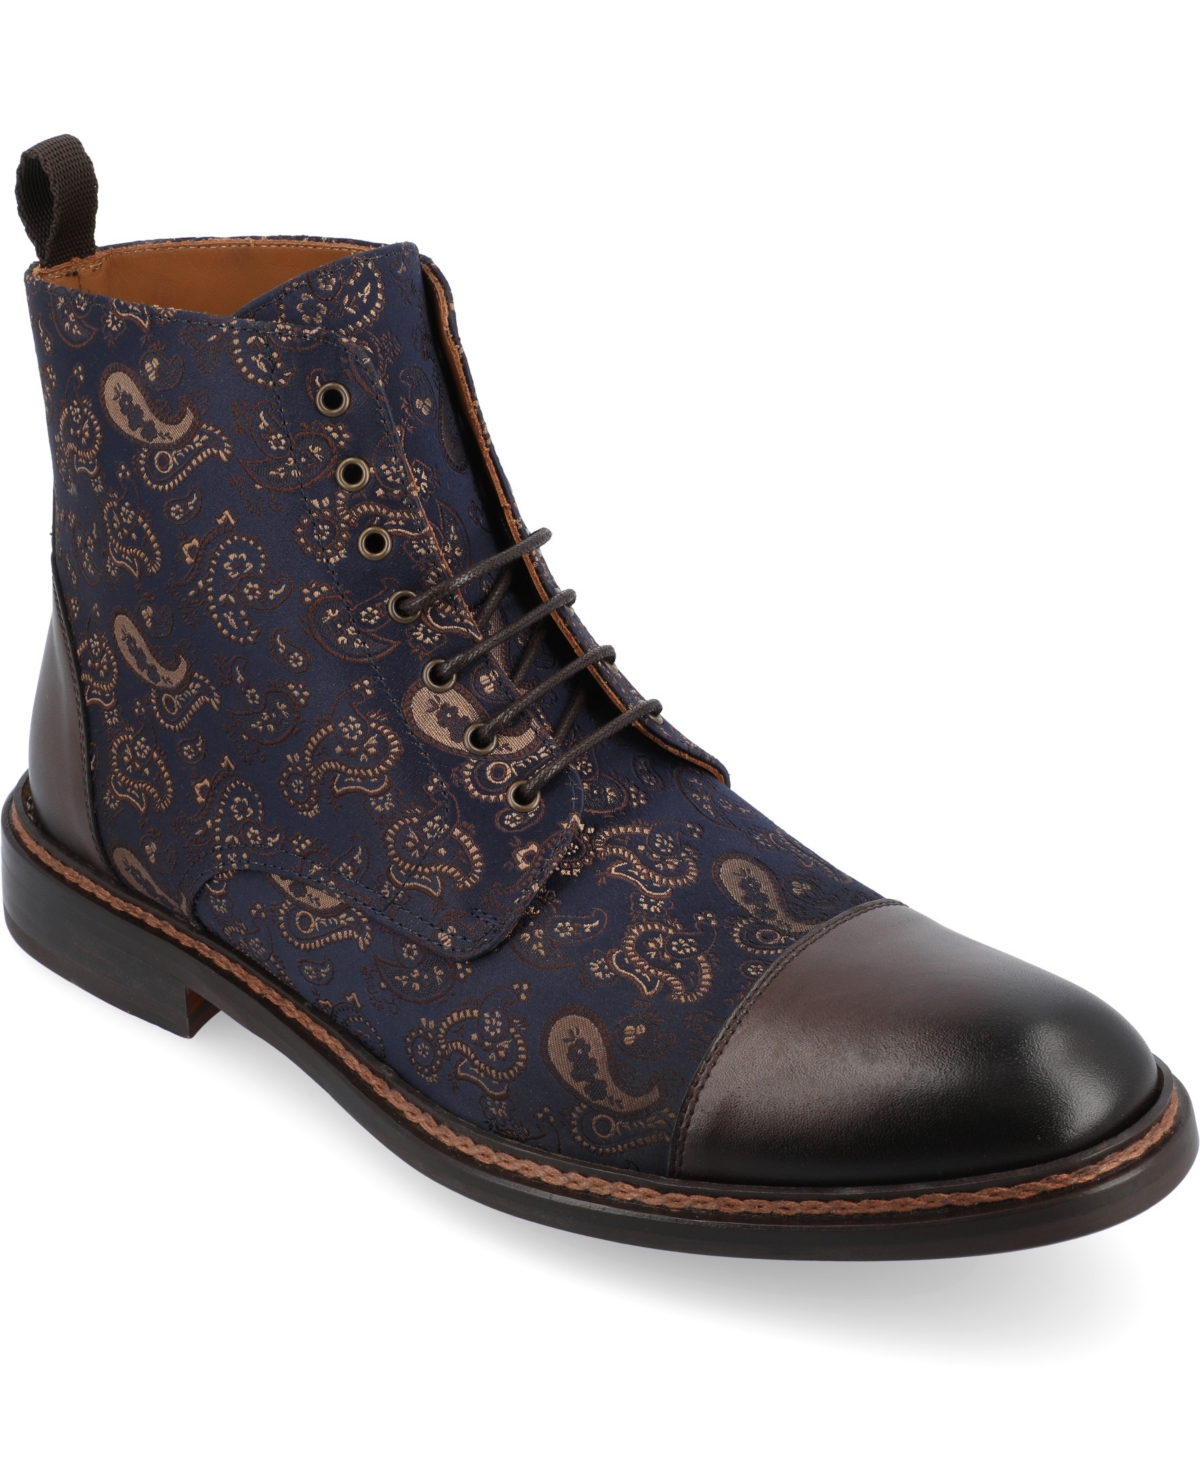 Men's The Jack Boot - Brown Paisley